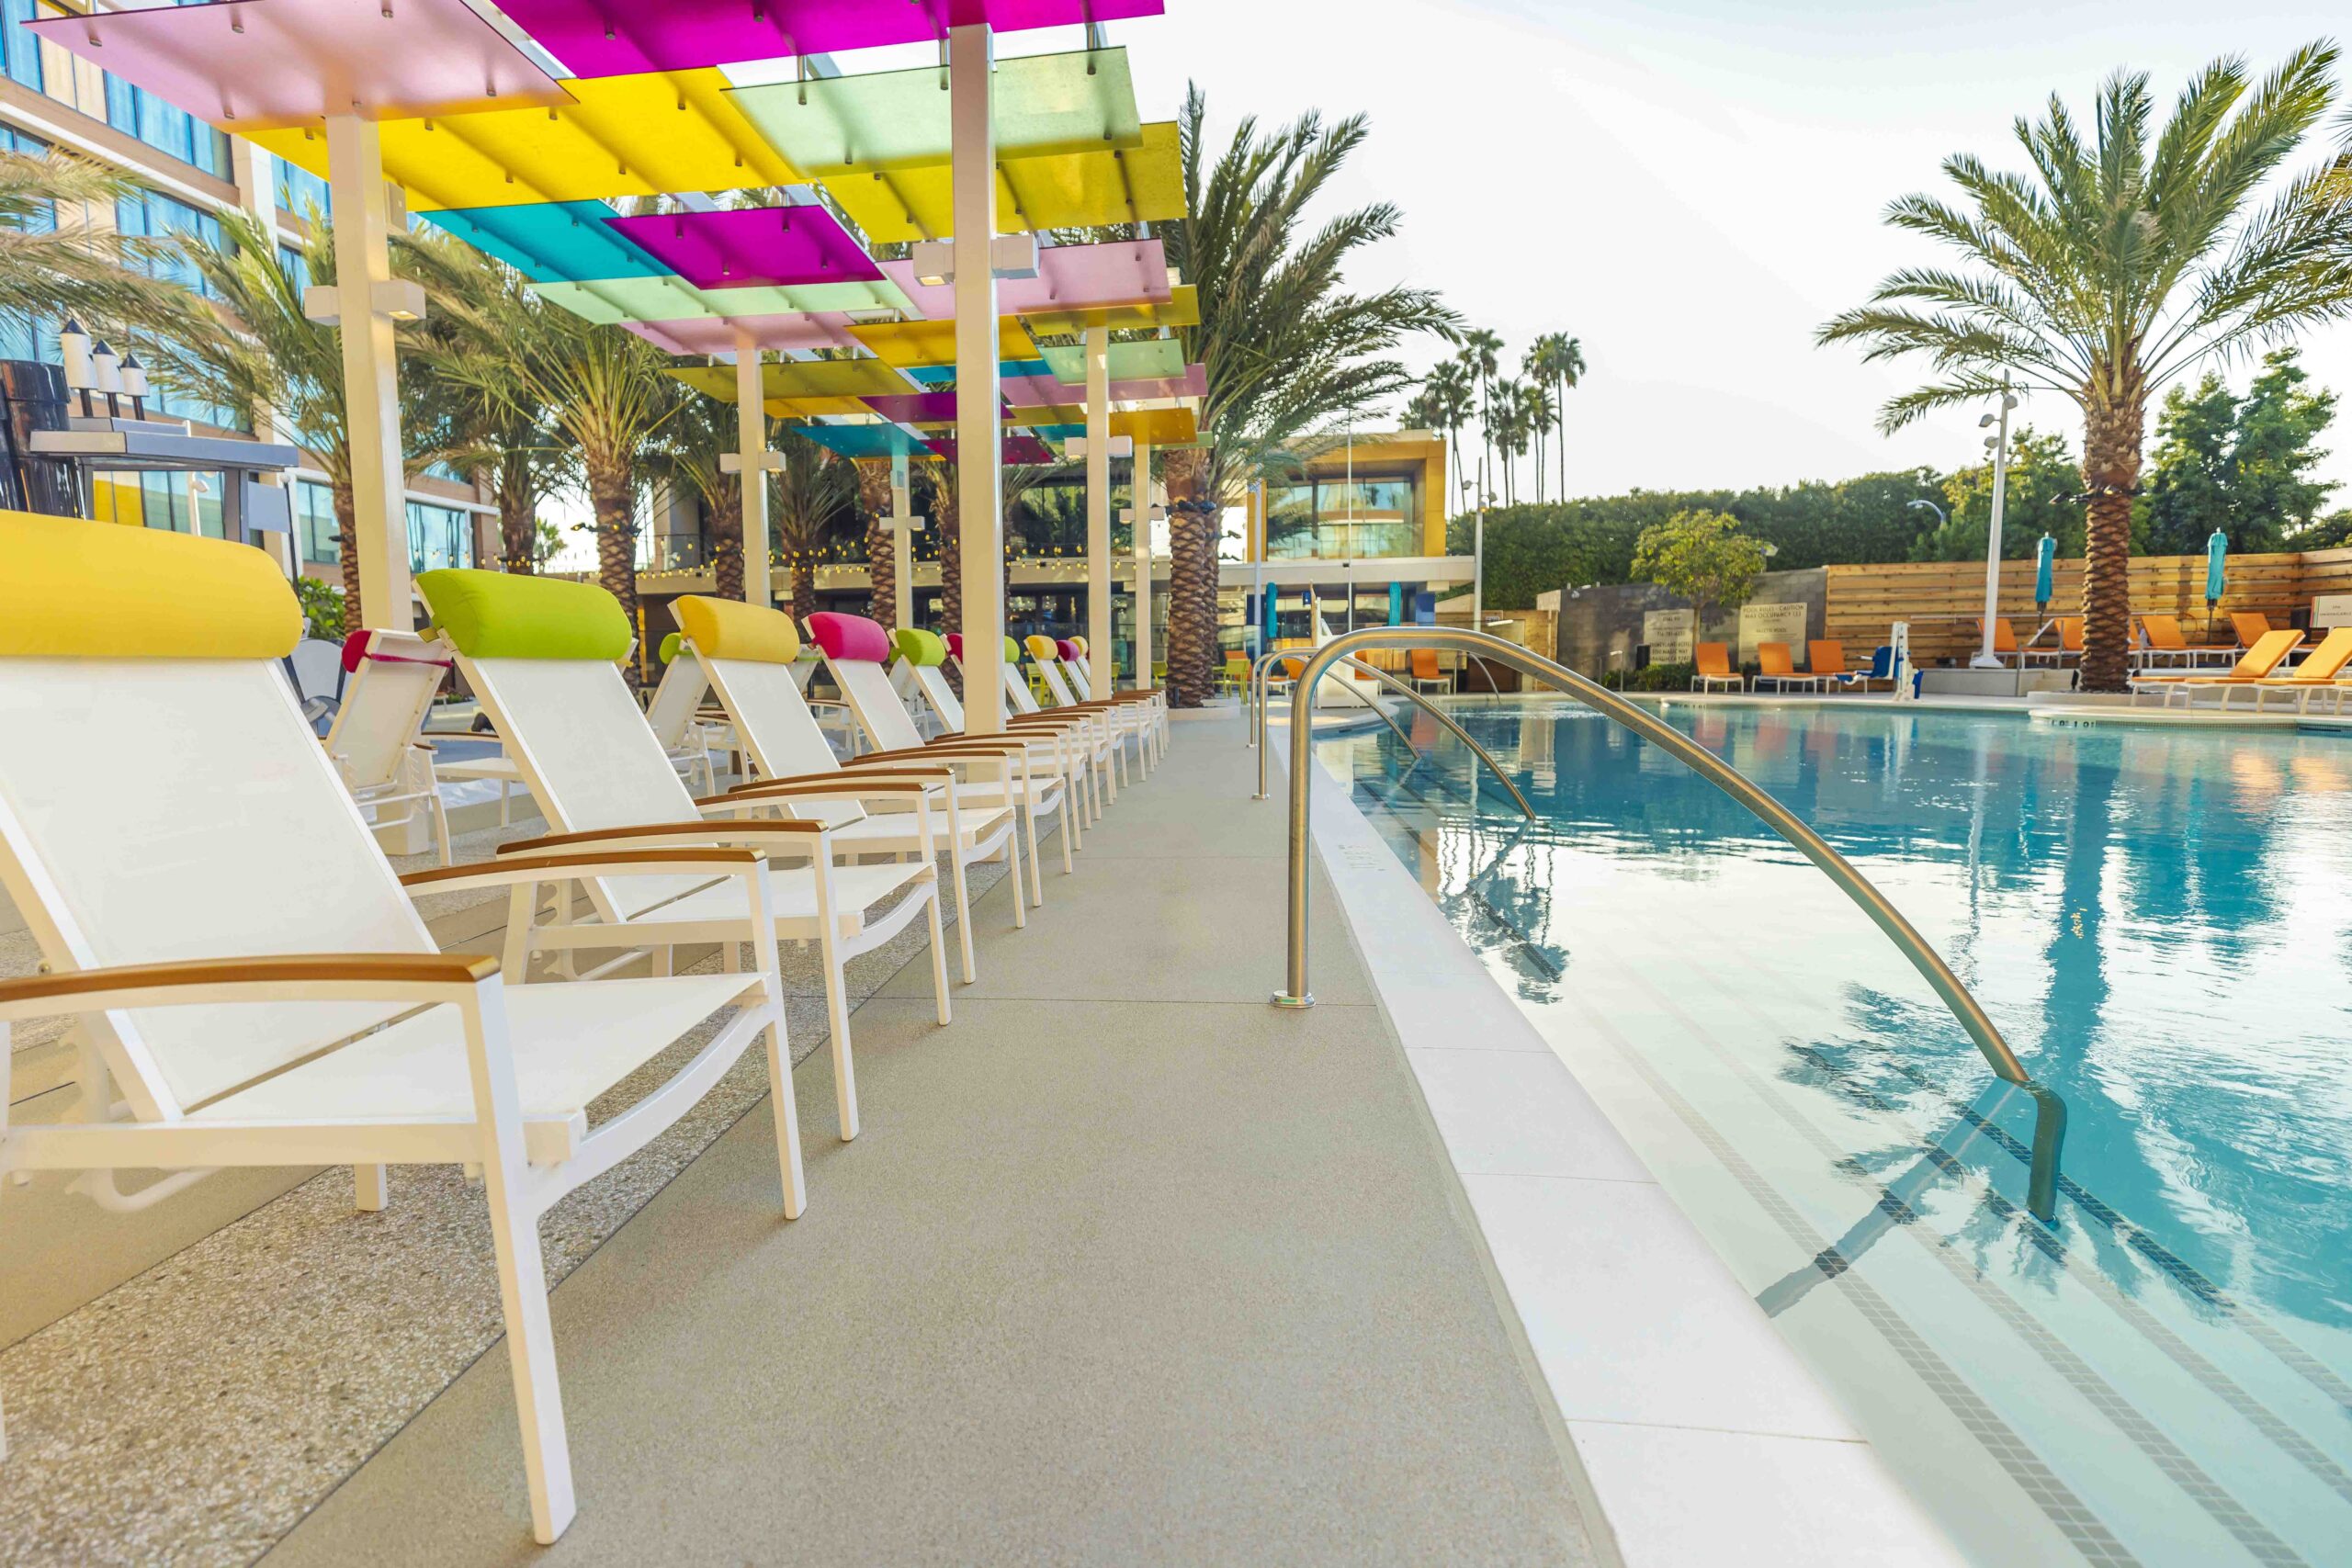 The brand-new Palette Pool area, a nod to an artist’s paint palette, offers an inviting oasis that is perfect for relaxation and play at The Villas at Disneyland Hotel at the Disneyland Resort in Anaheim, Calif. (Christian Thompson/Disneyland Resort)